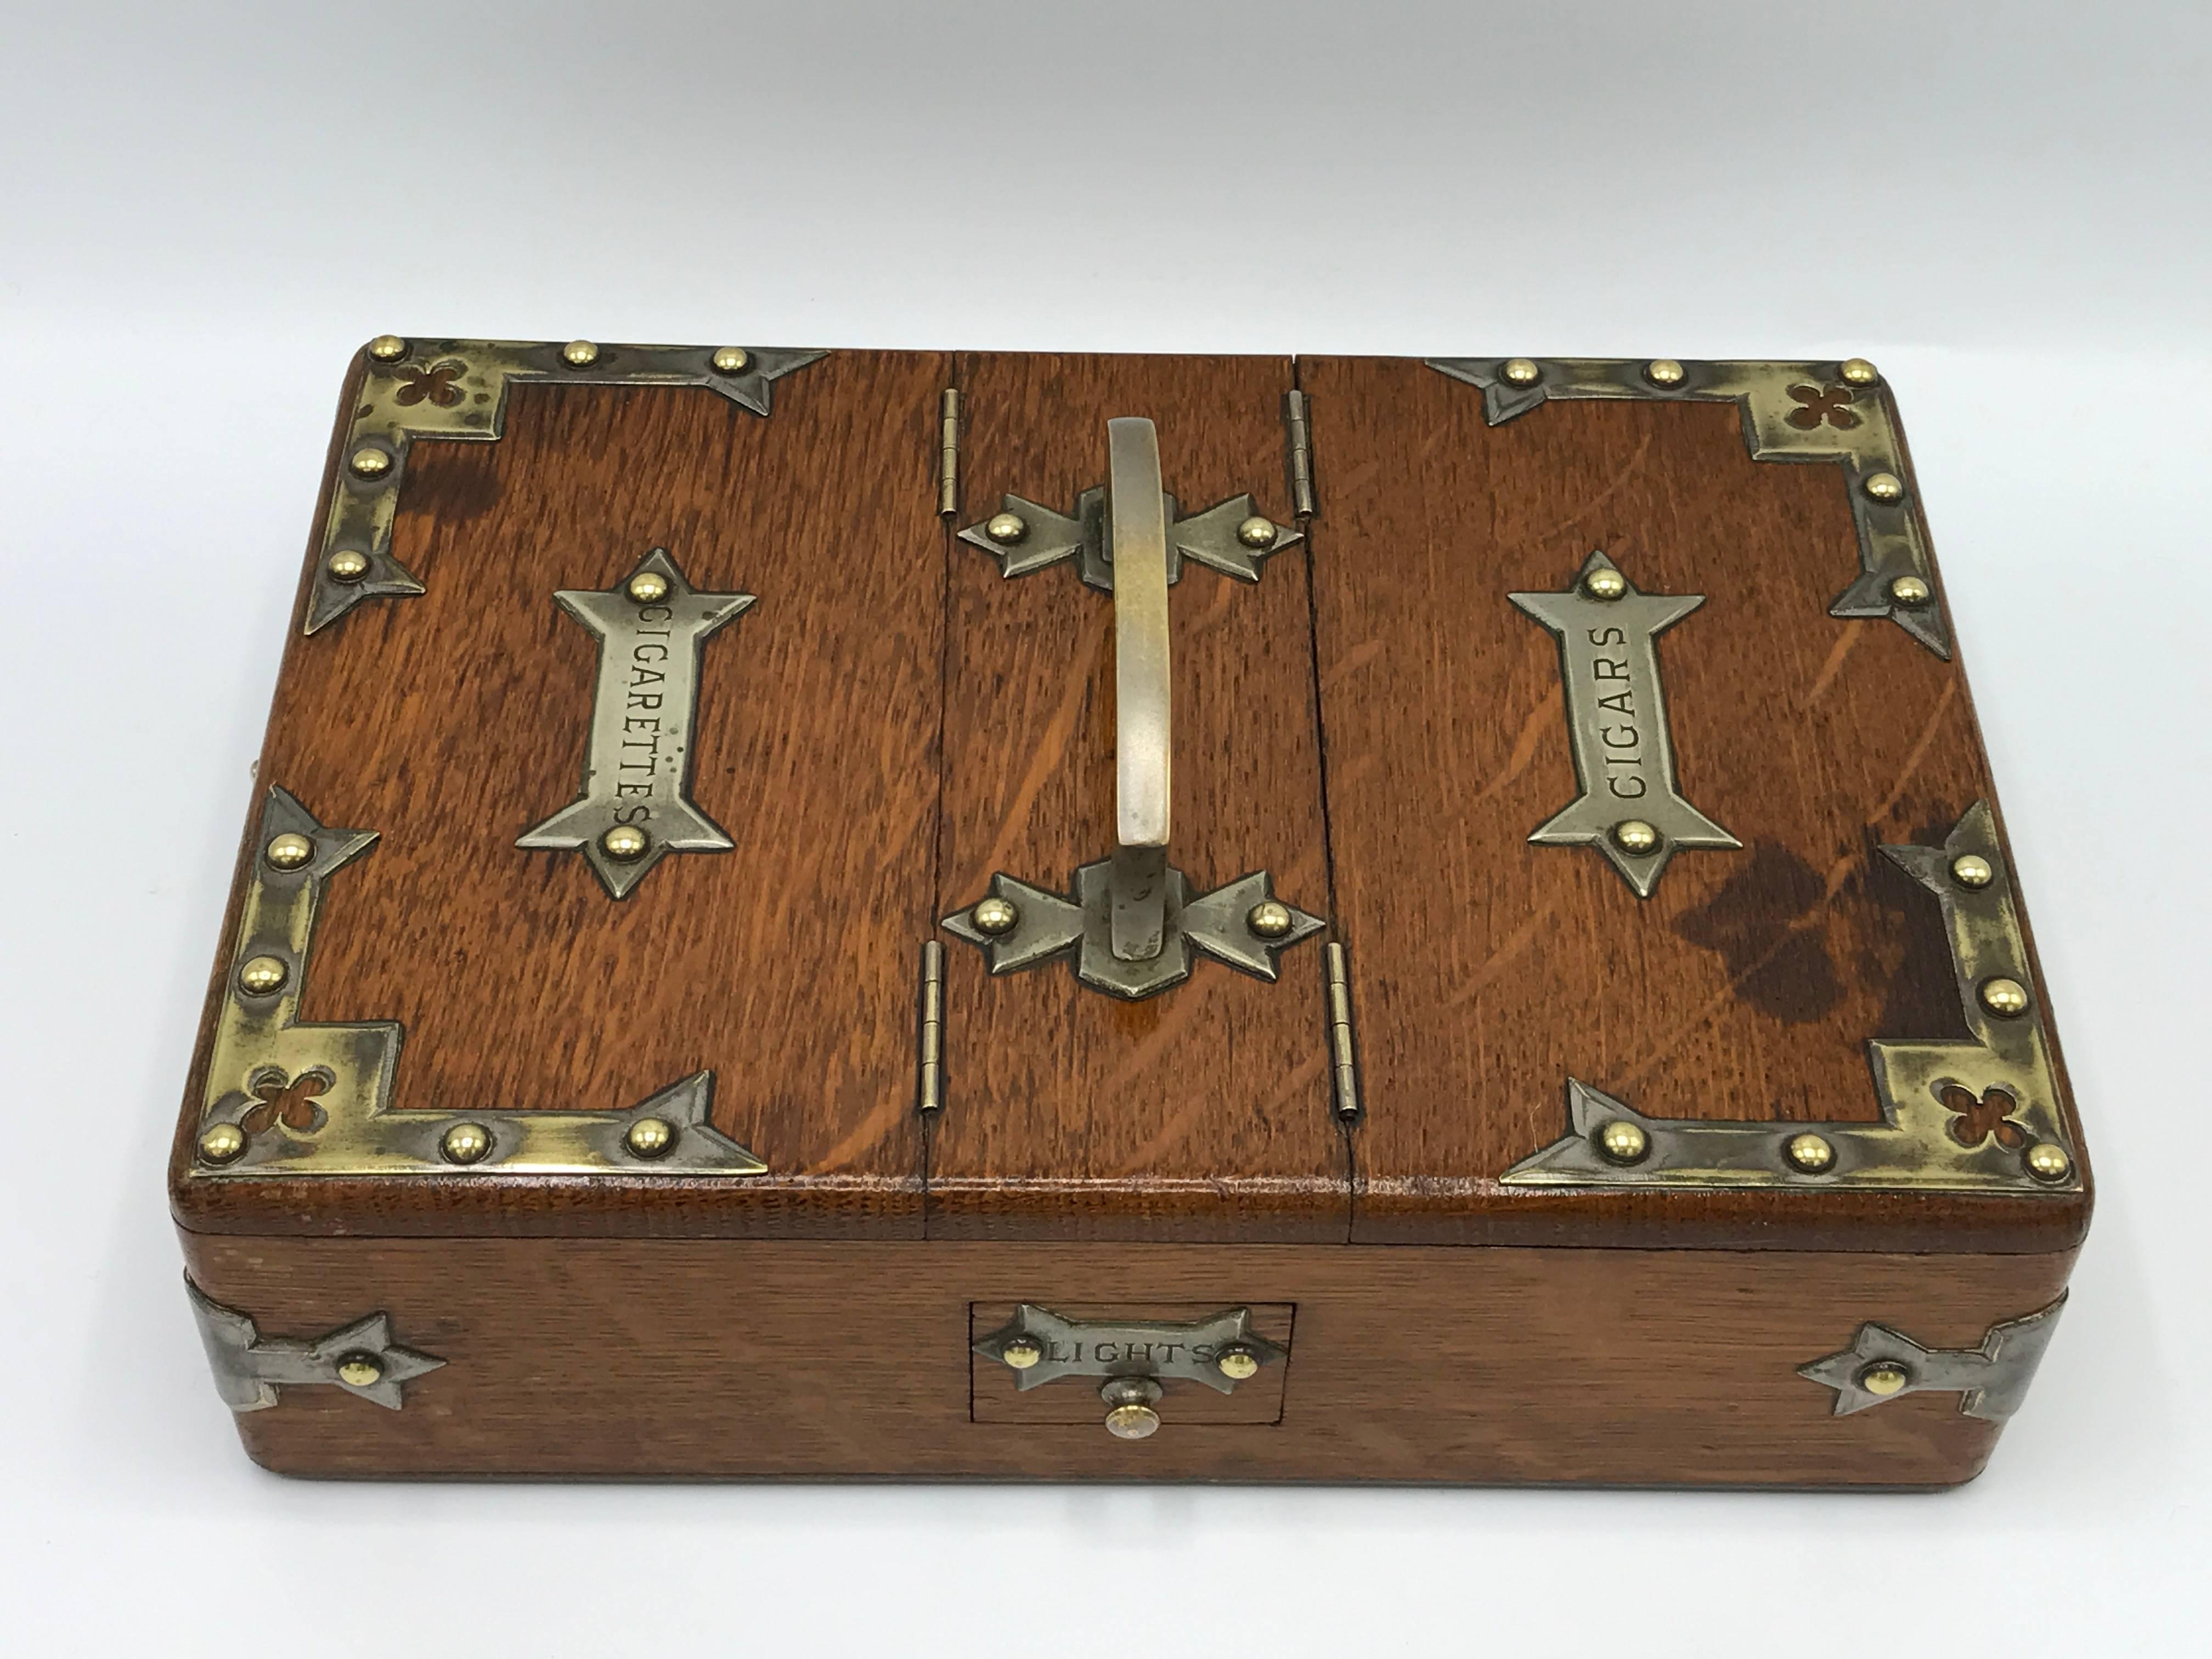 Offered is a stunning, 1940s humidor box. The piece features beautiful, brass Campaign chest style hardware and compartment doors. Two “drawers” for "Lights", one compartment for "Cigars", and one compartment for